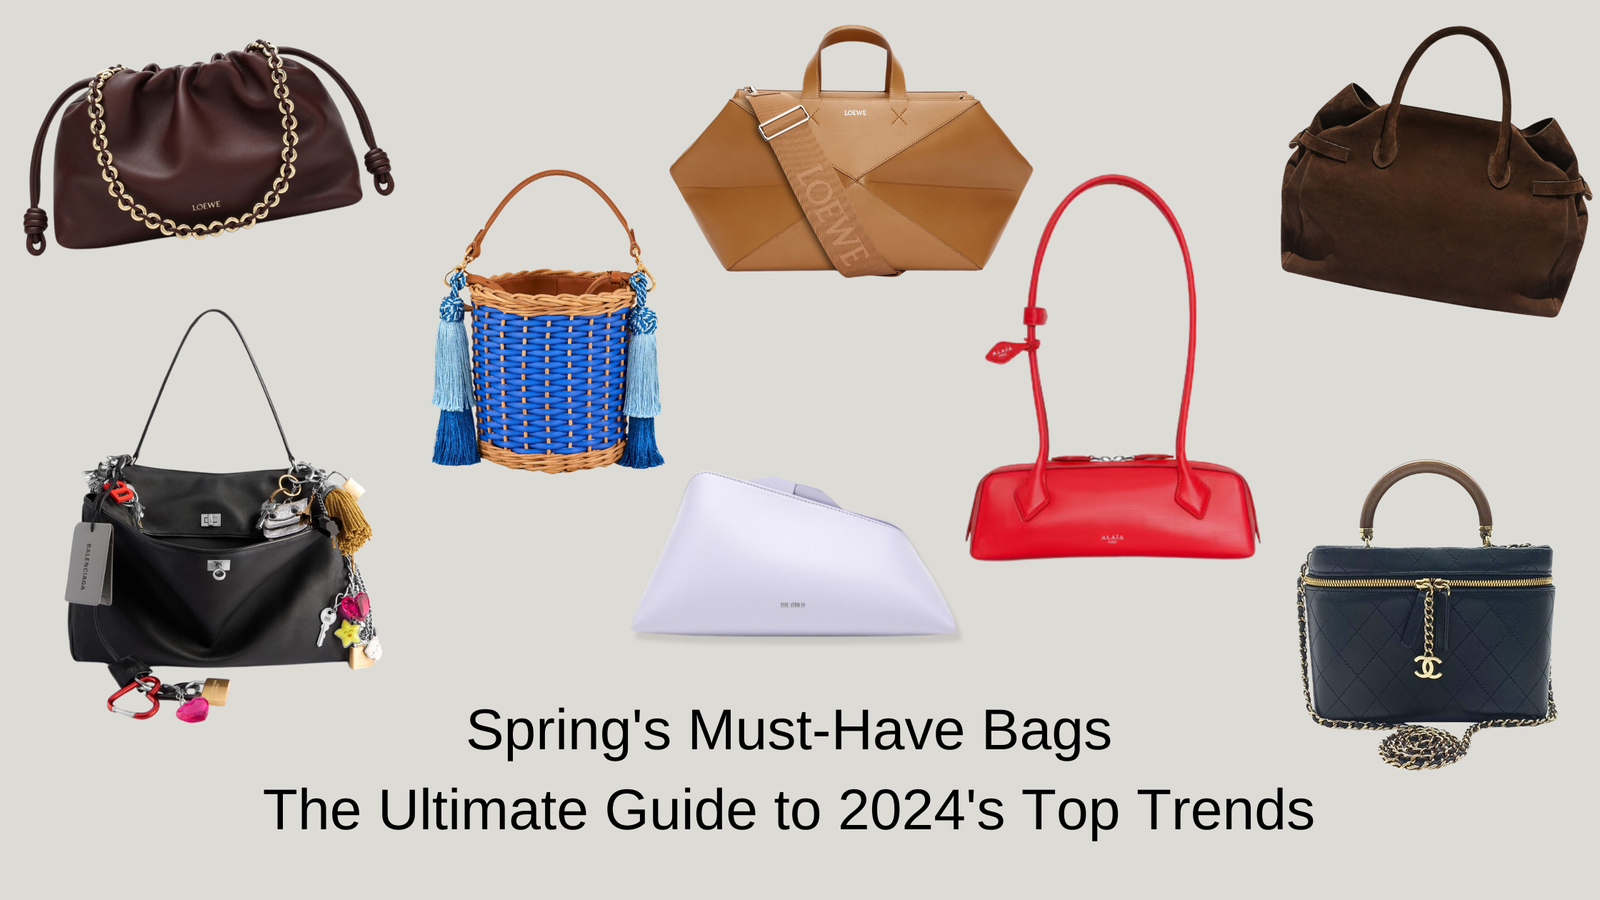 Spring's Must-Have Bags 2024's Top Trends